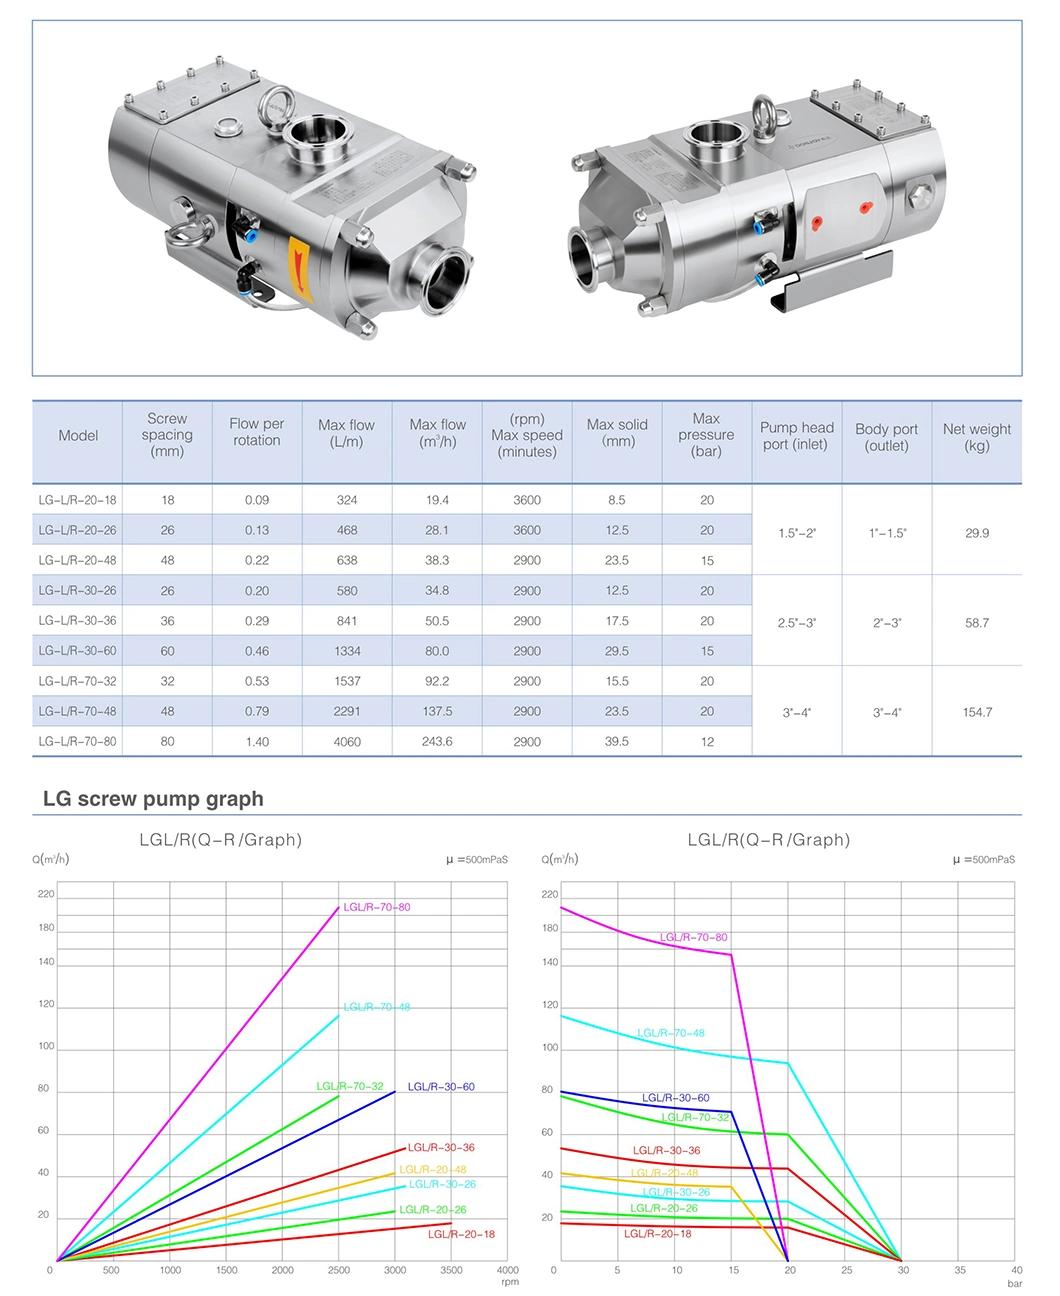 3A Certified Food Grade Twin Screw Pump for Food Beverage Processing